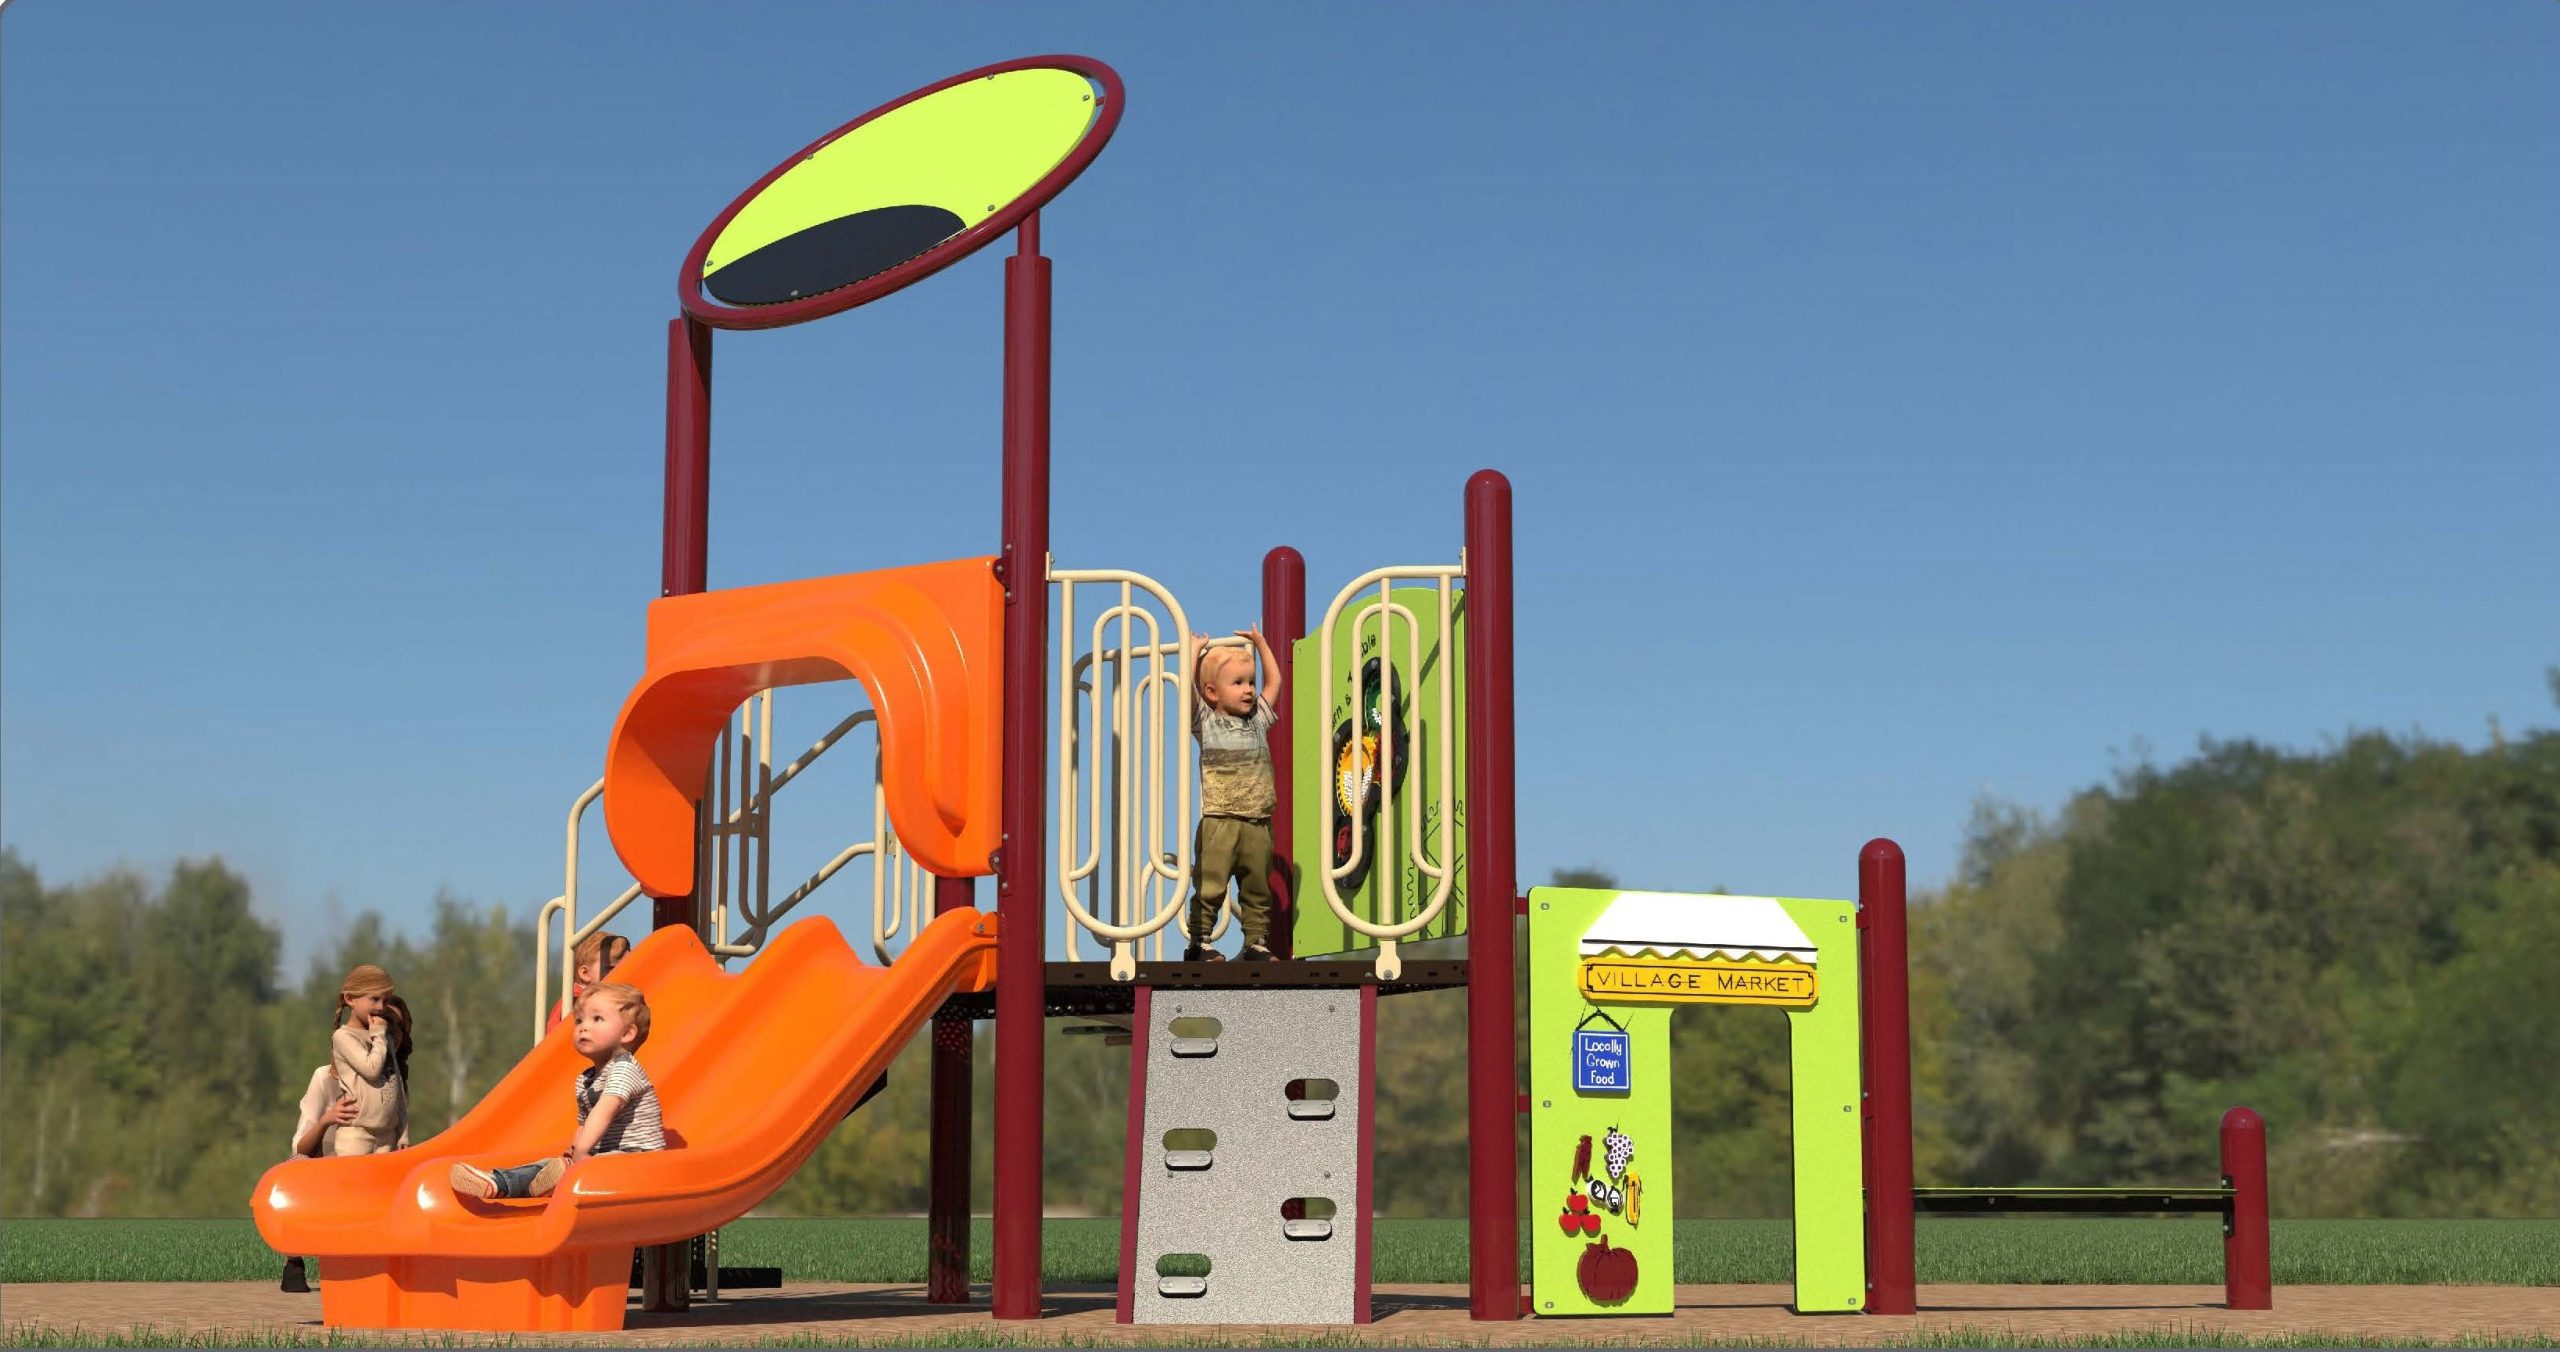 Image of the junior play structure in the final design for the new Bob Acton Park Playground. The play structure includes two slides, climbing features, and sensory play equipment, as well as a balancing beam.